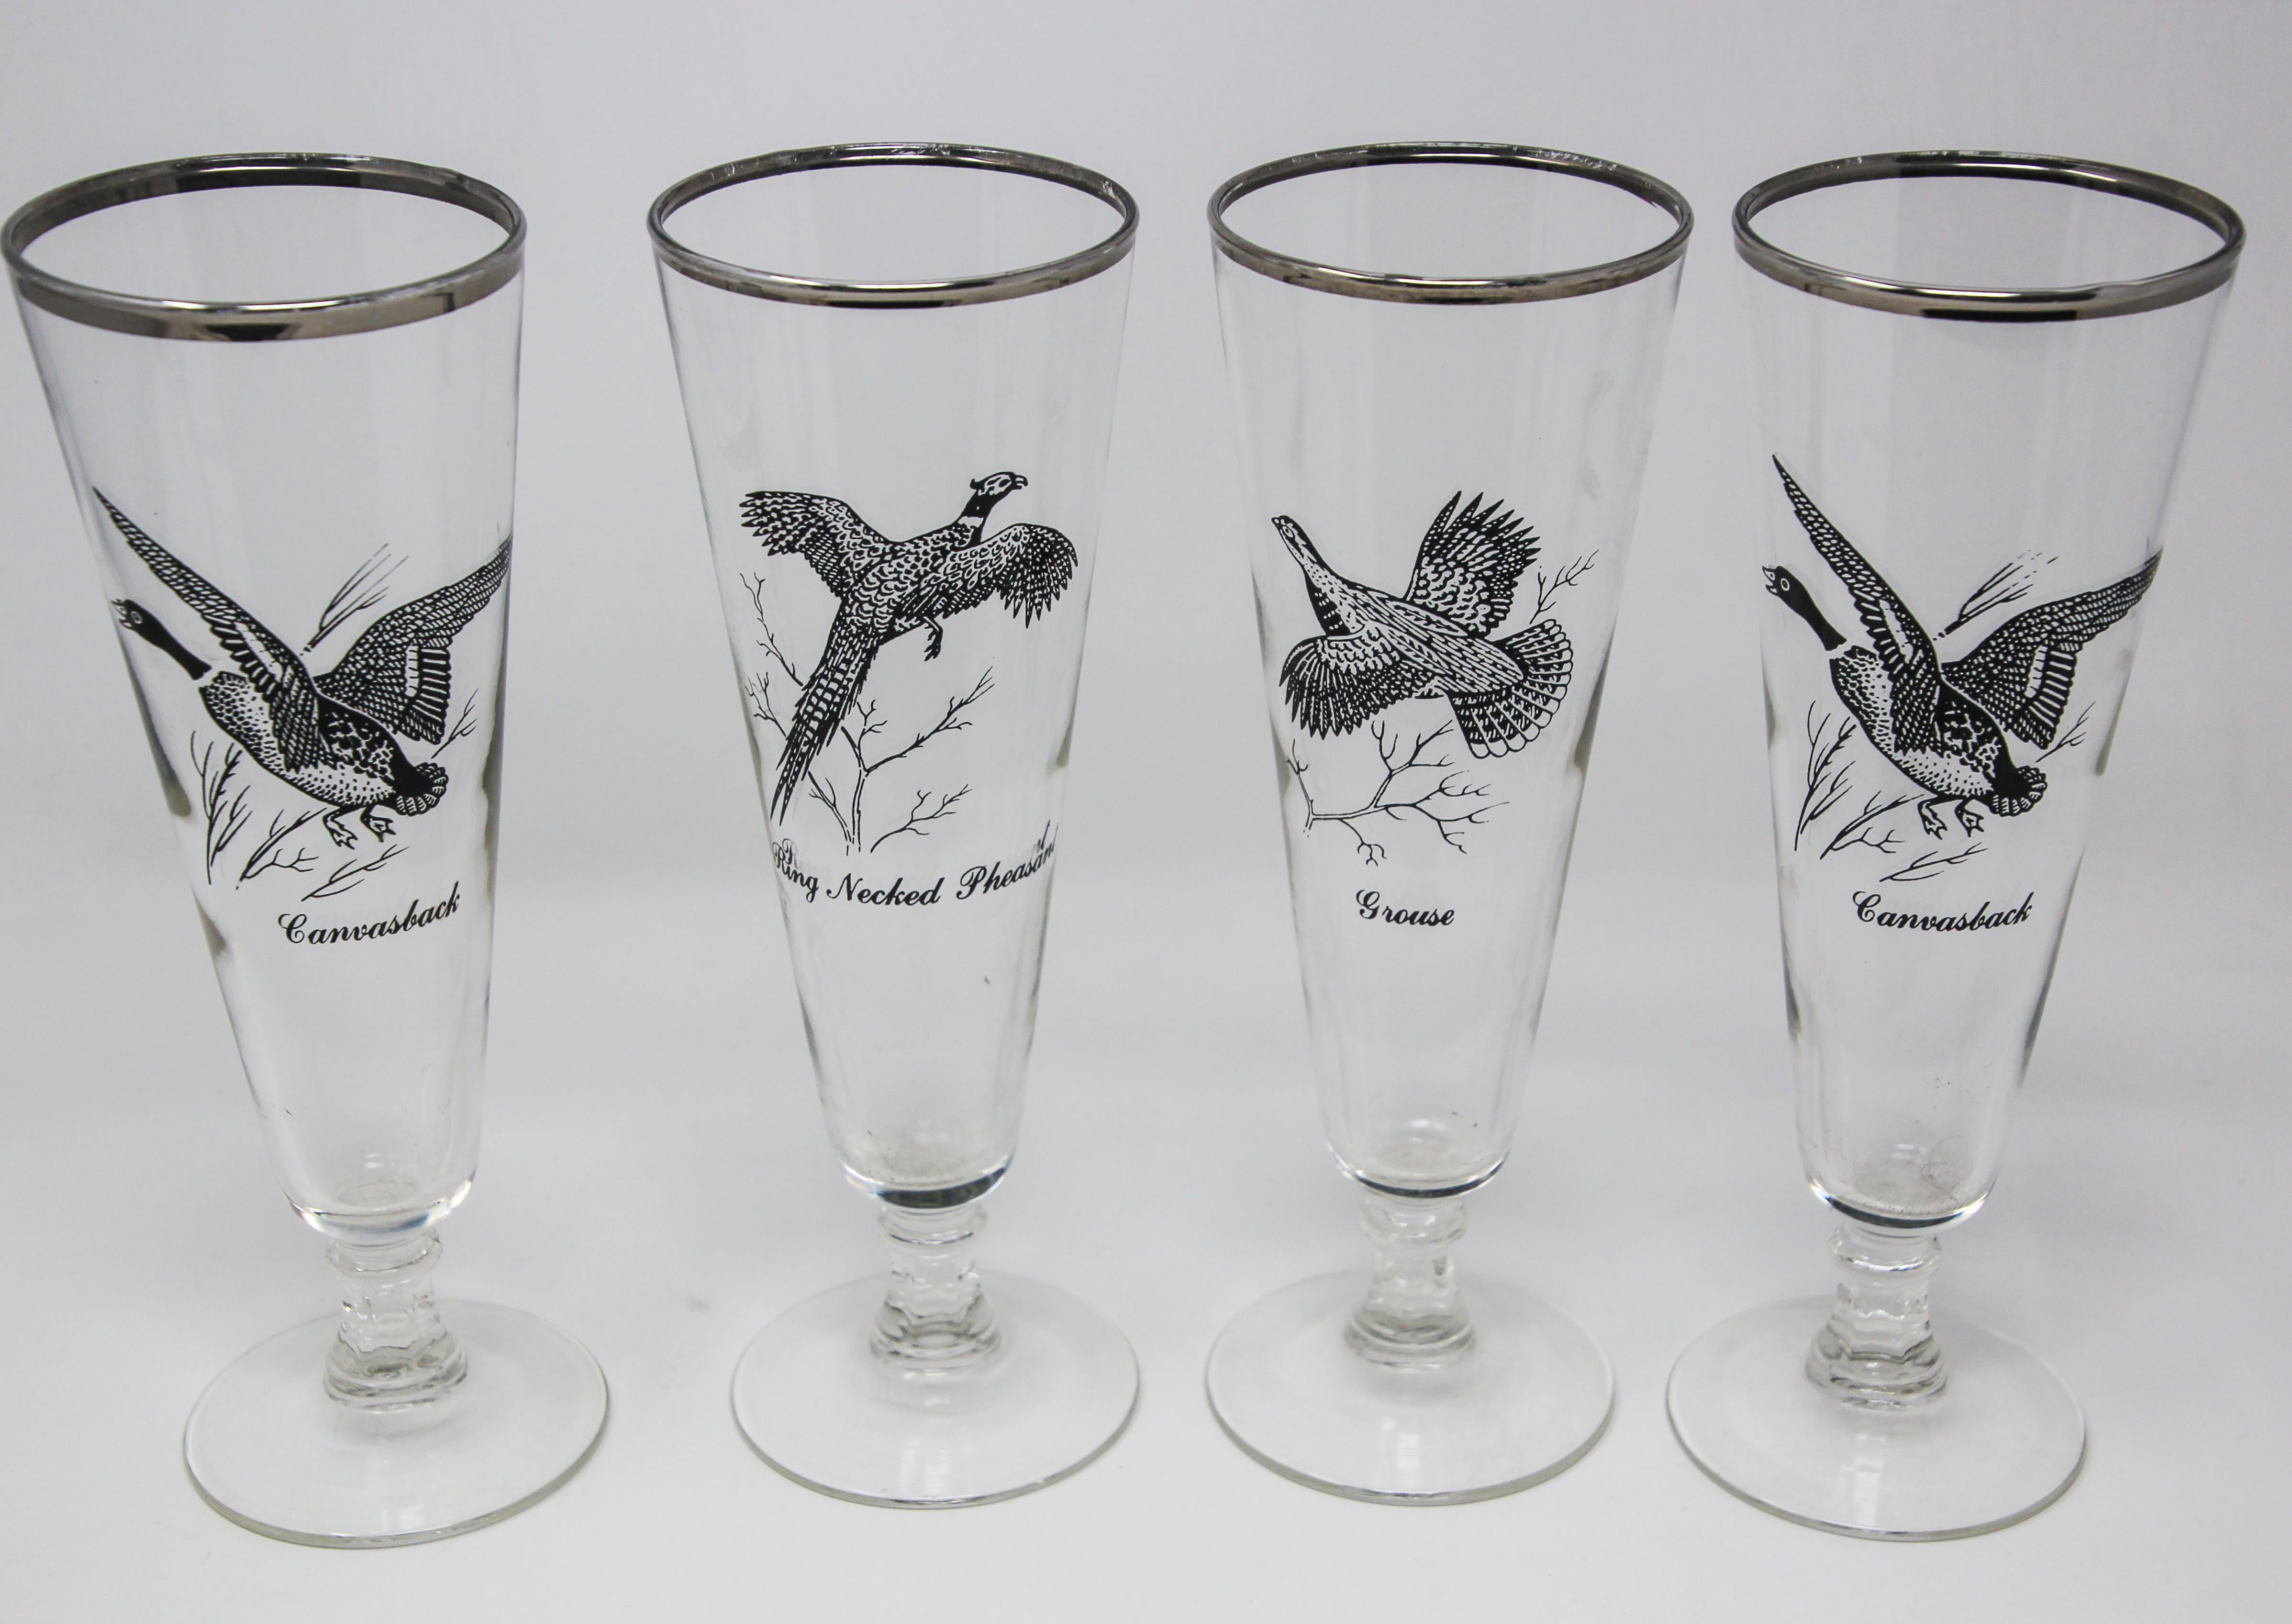 Vintage set of 4 silver rimmed federal glass pilsner glasses game bird.
Classic style for the outdoor enthusiast, tall pilsner beer glasses set in the 